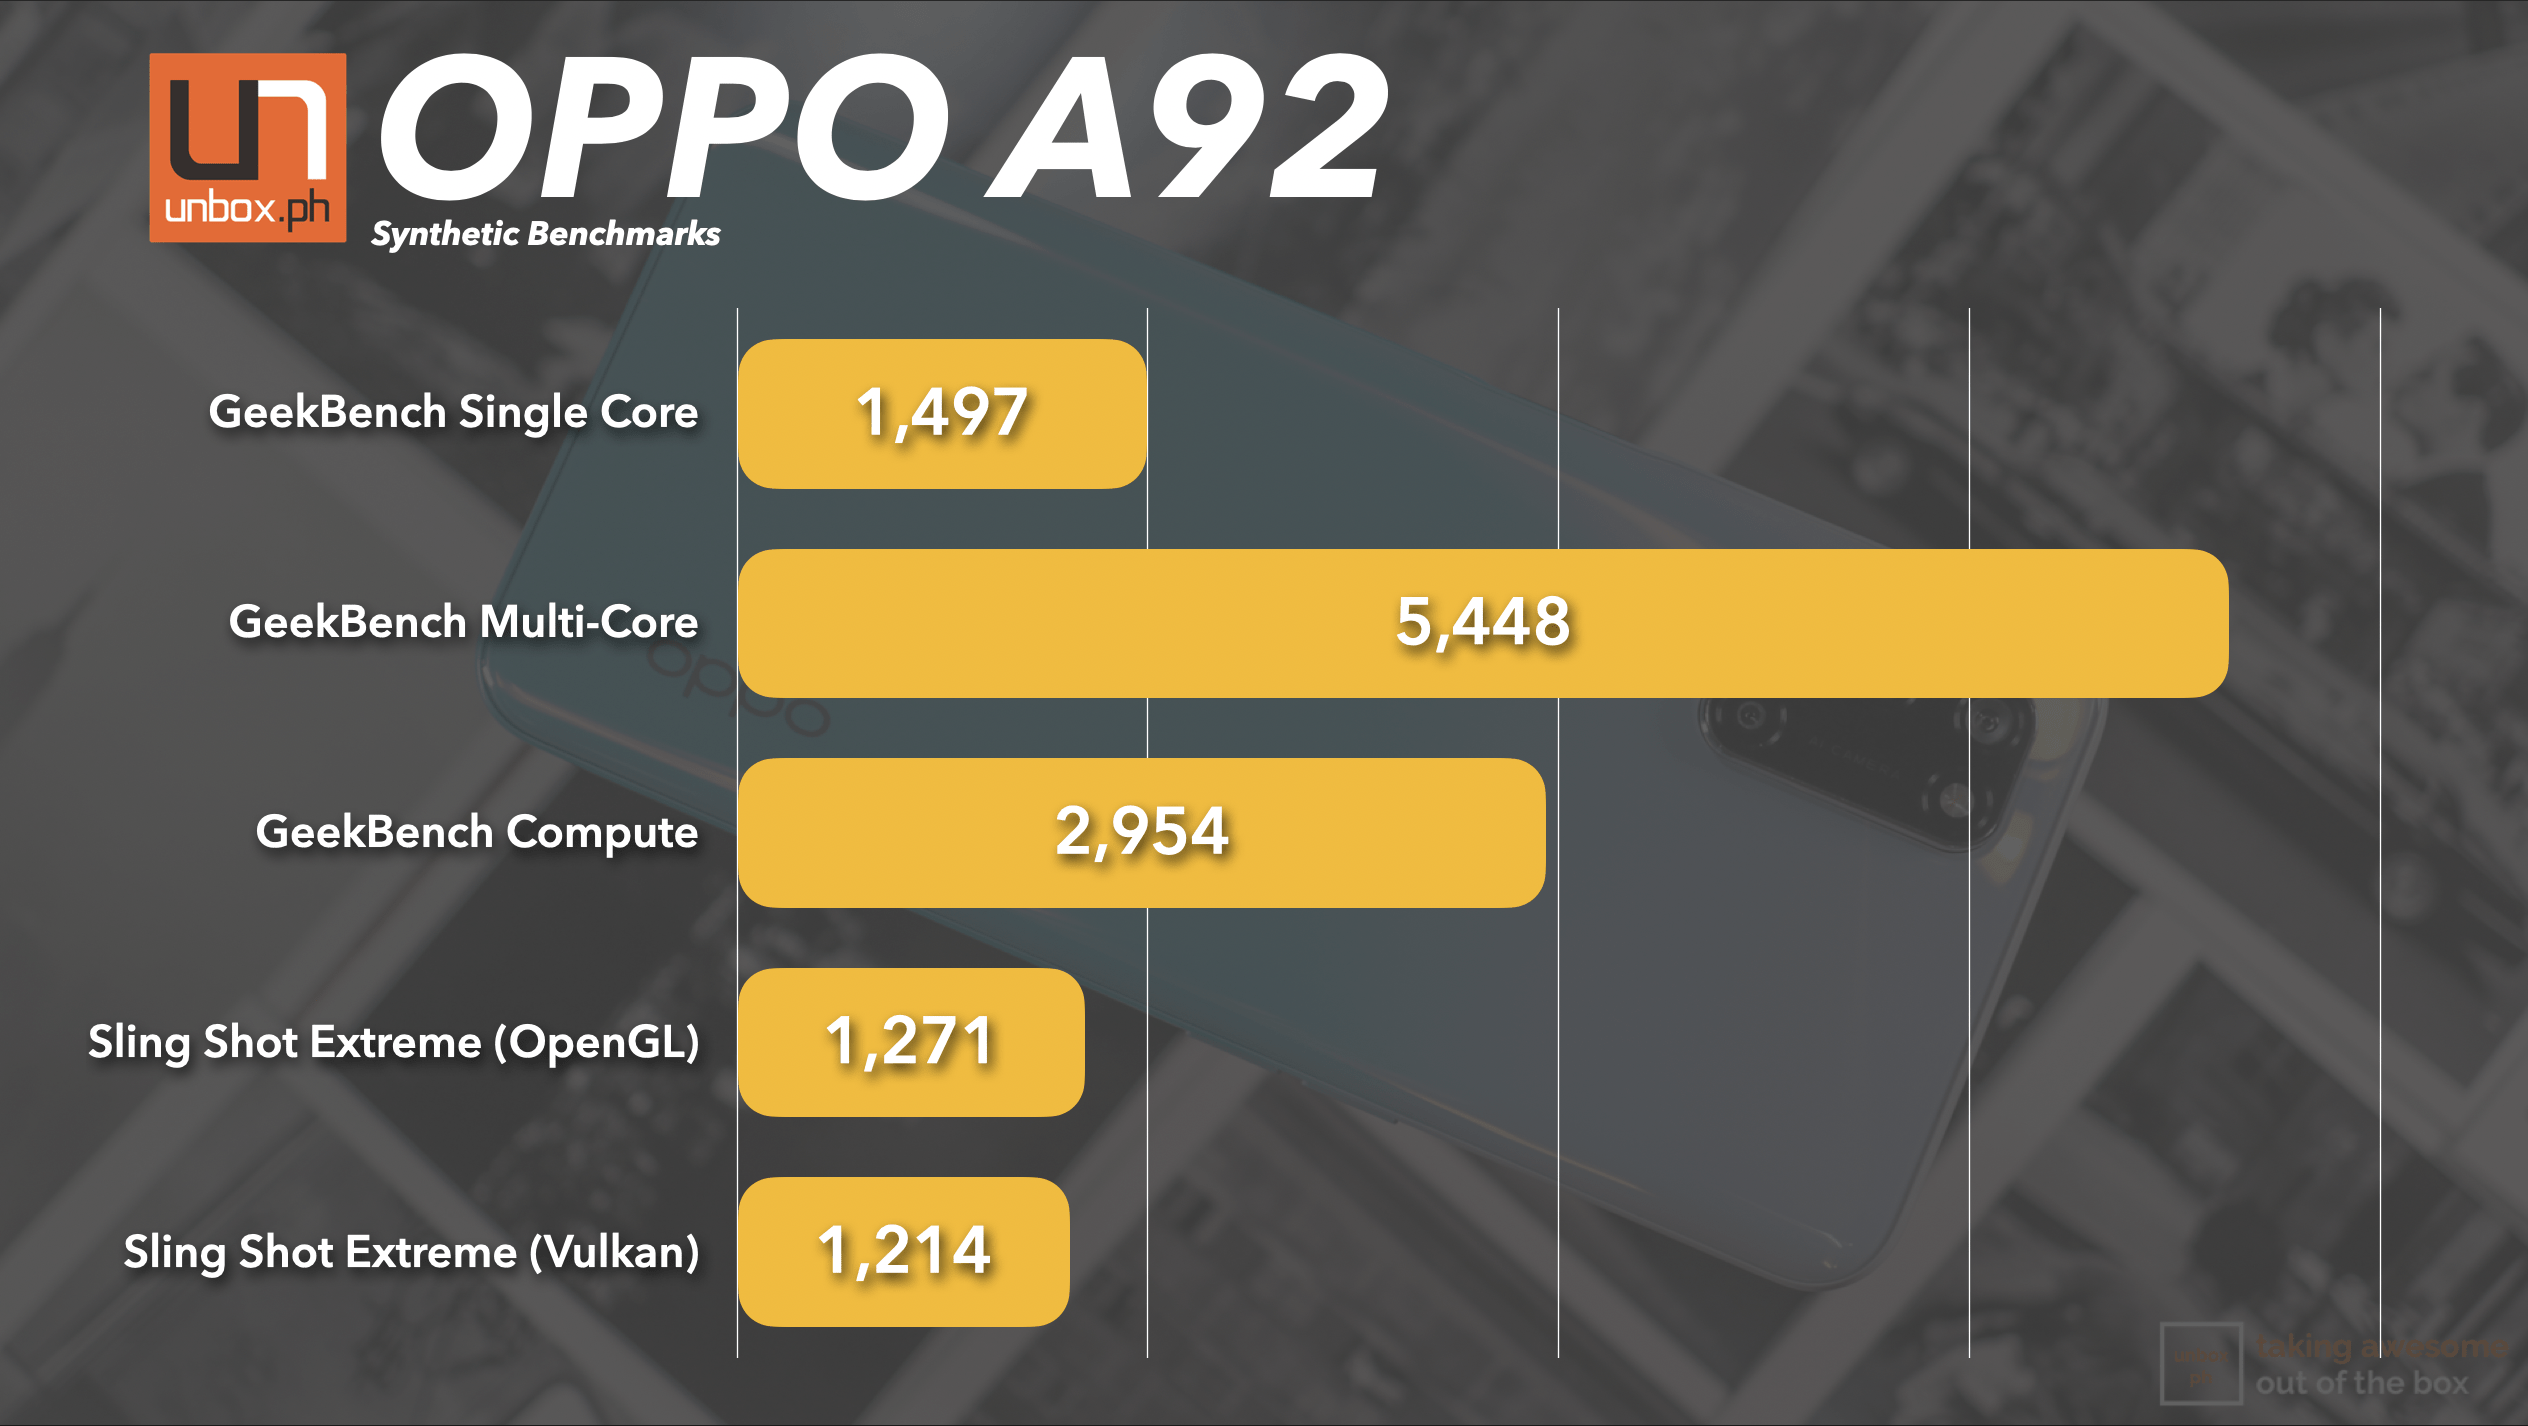 Oppo A92 Synthetic benchmarks